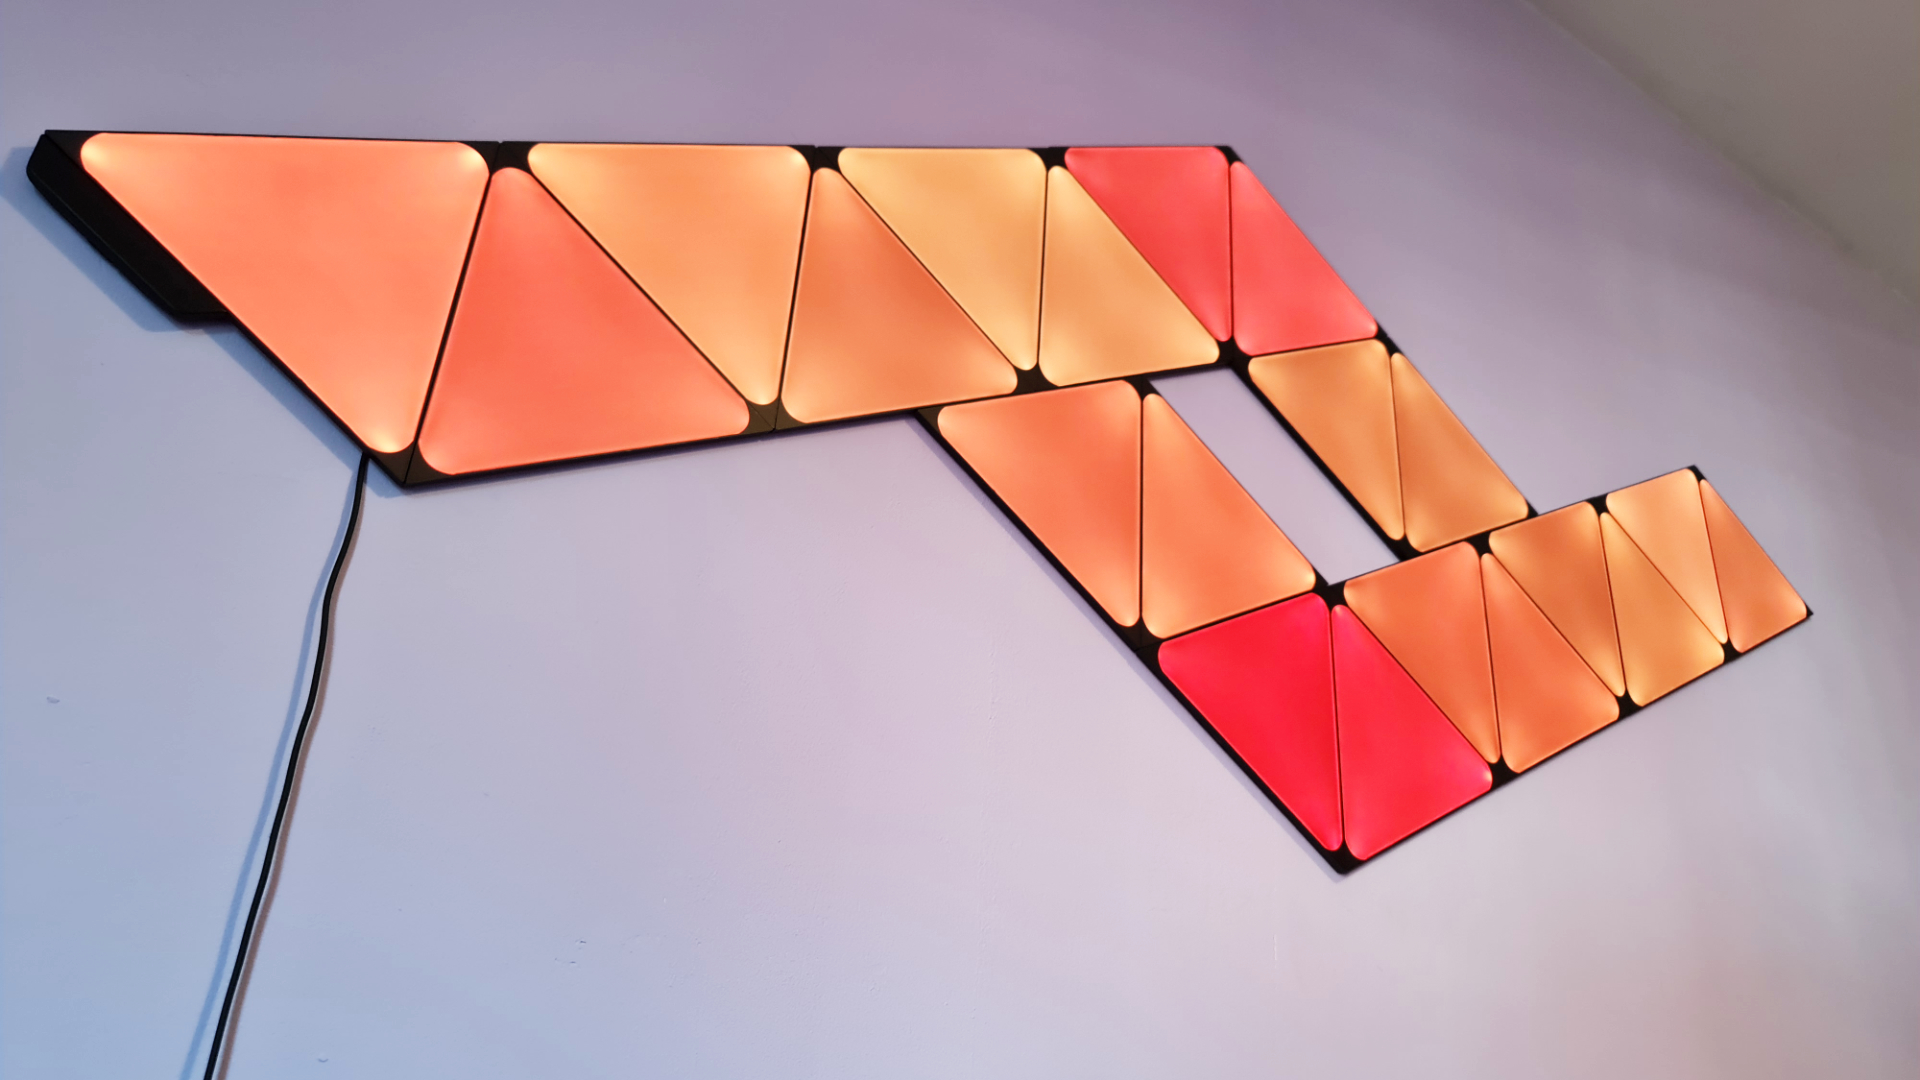 Nanoleaf Ultra Black Shapes with the traingles shining orange and red